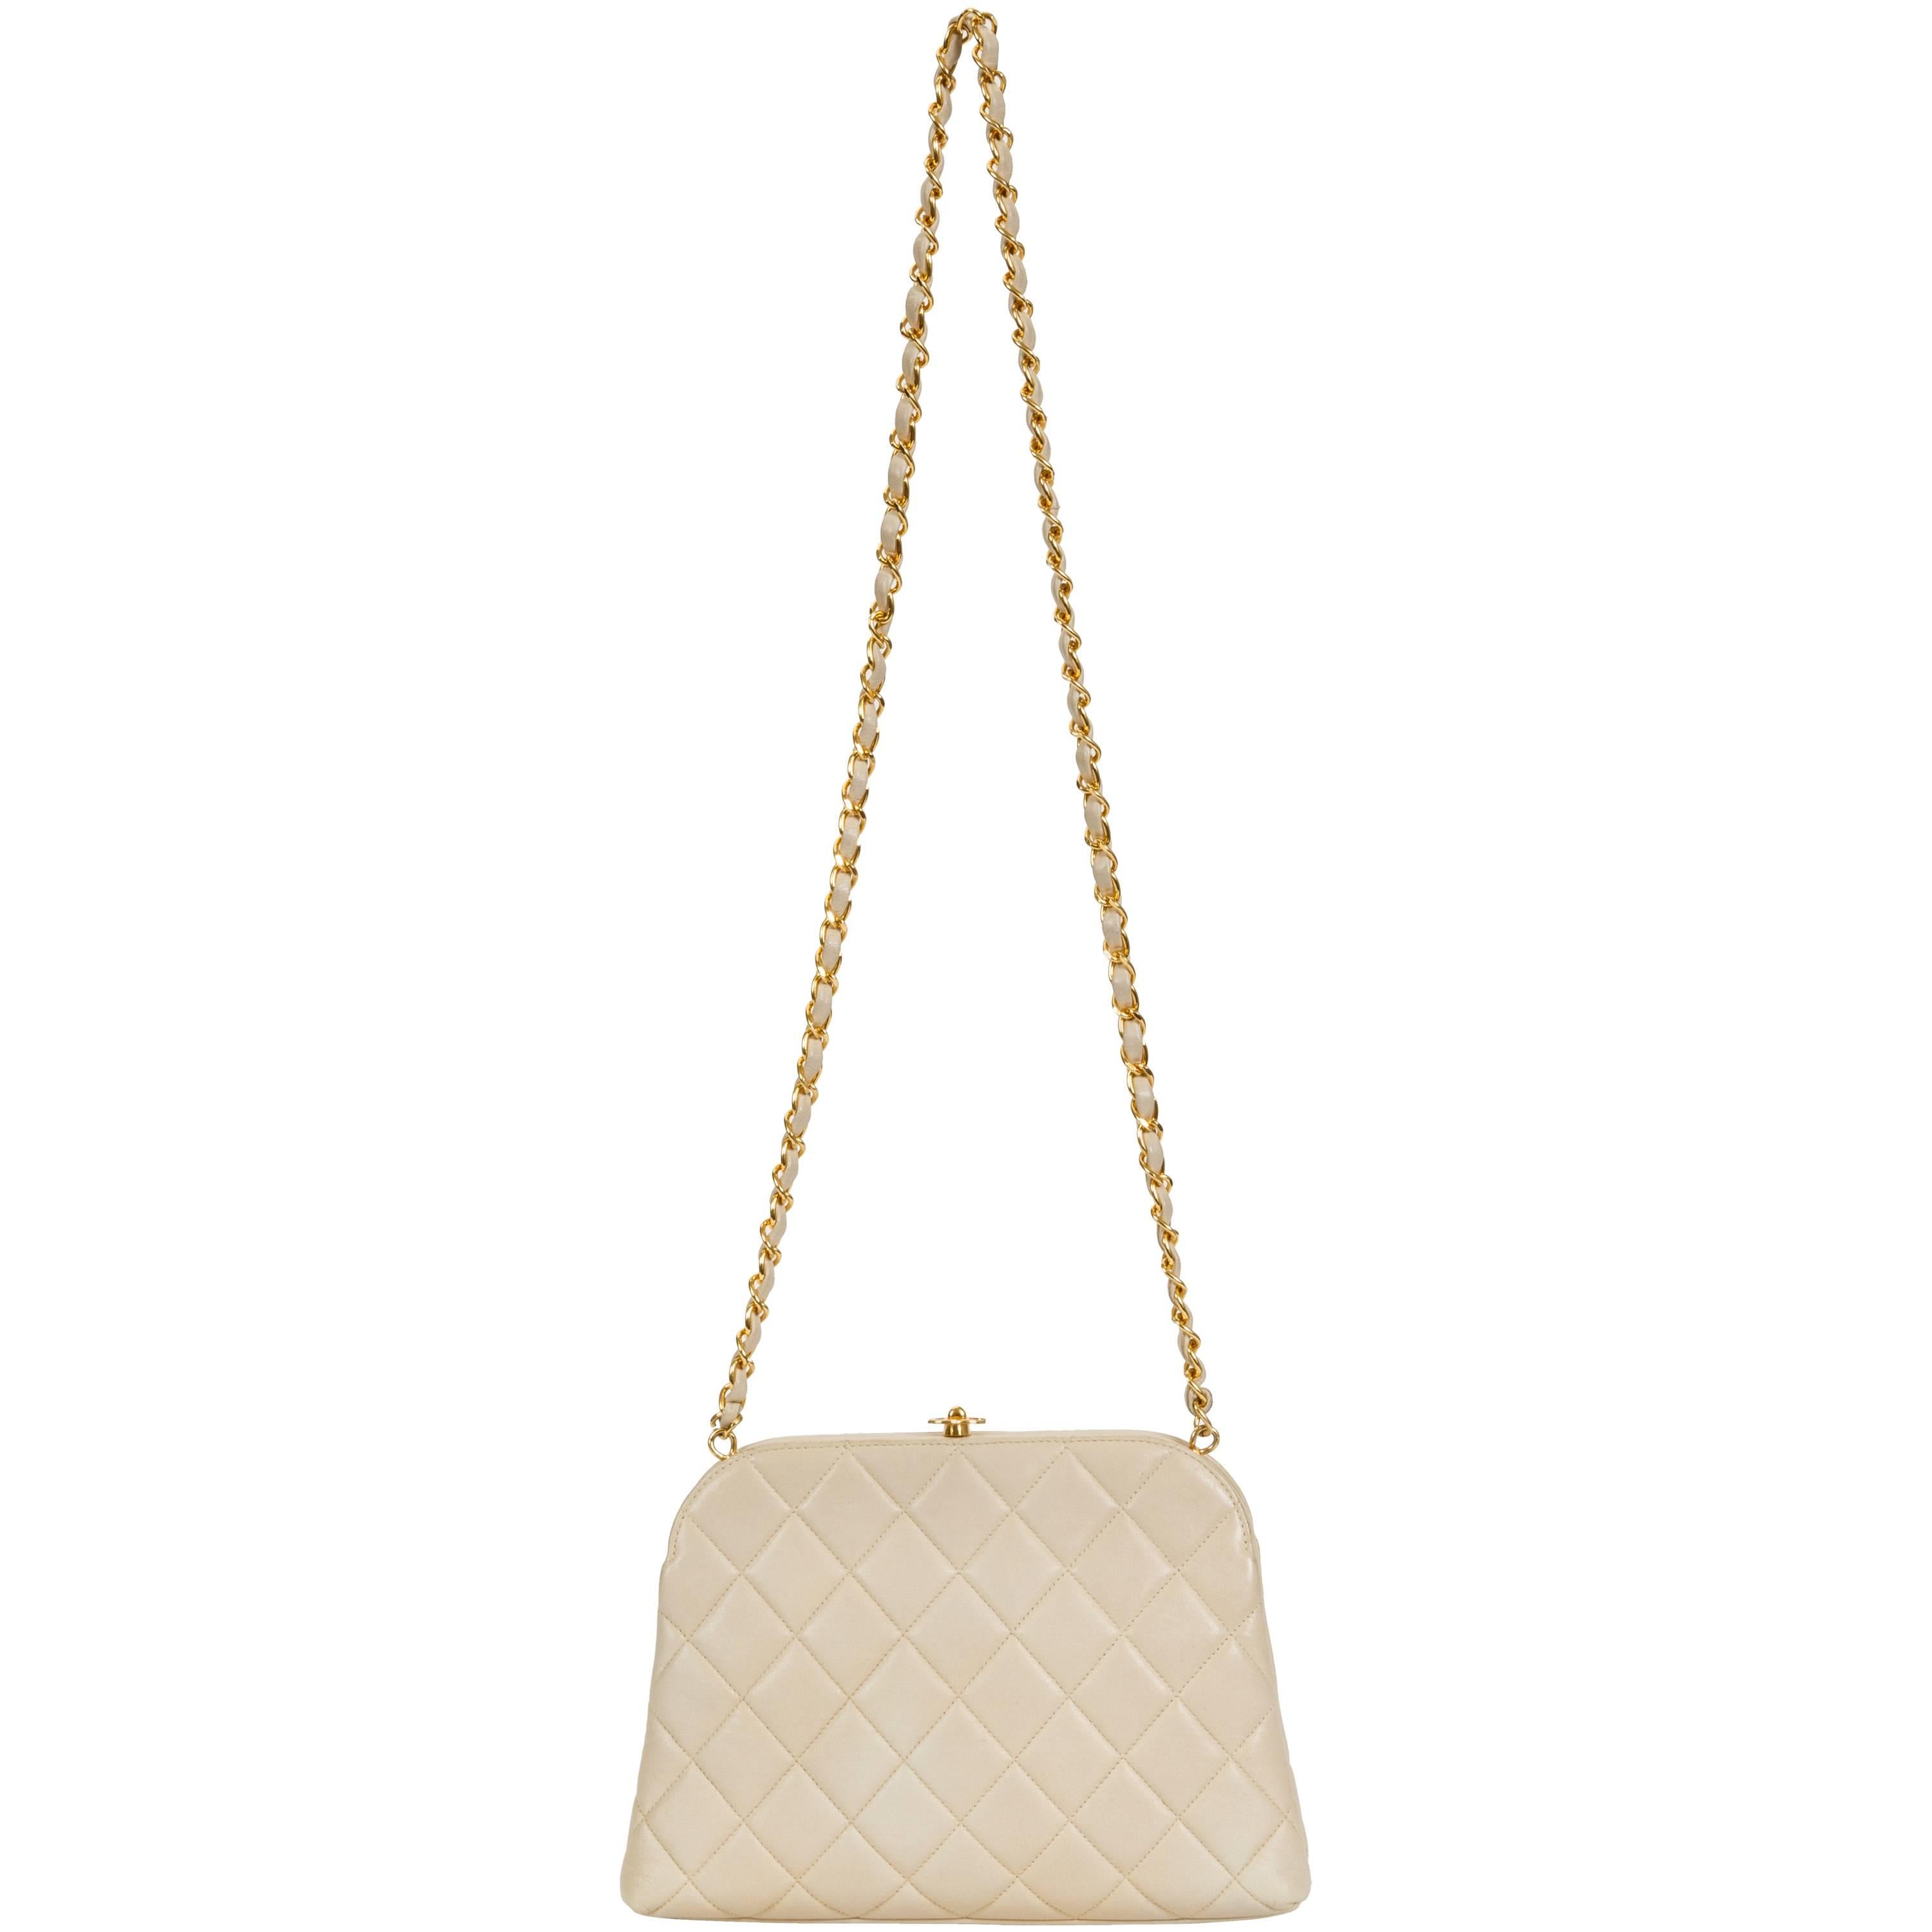 Chanel 1990's Beige Lambskin Quilted Kiss Lock Bag